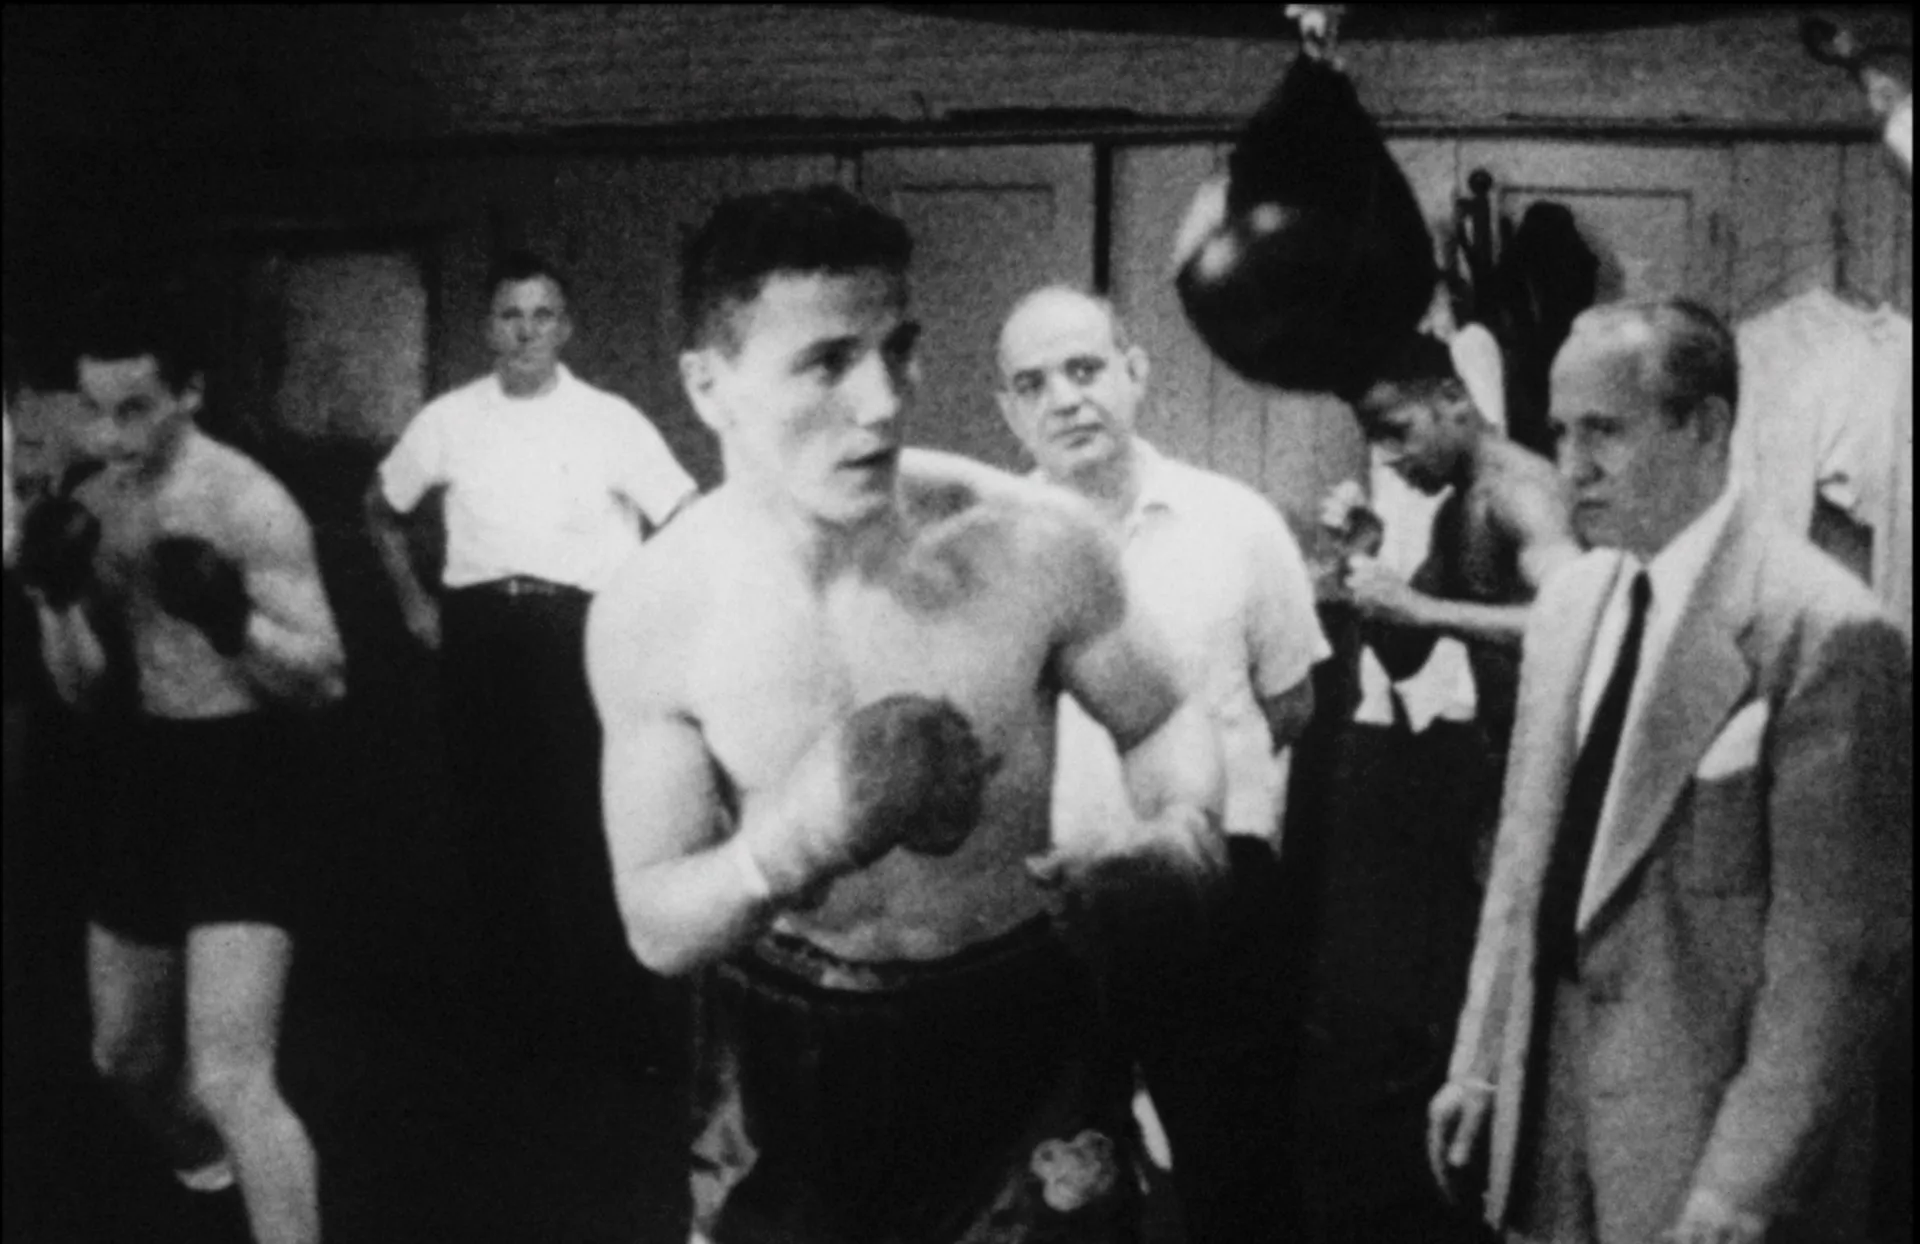 Still from Young Fighter